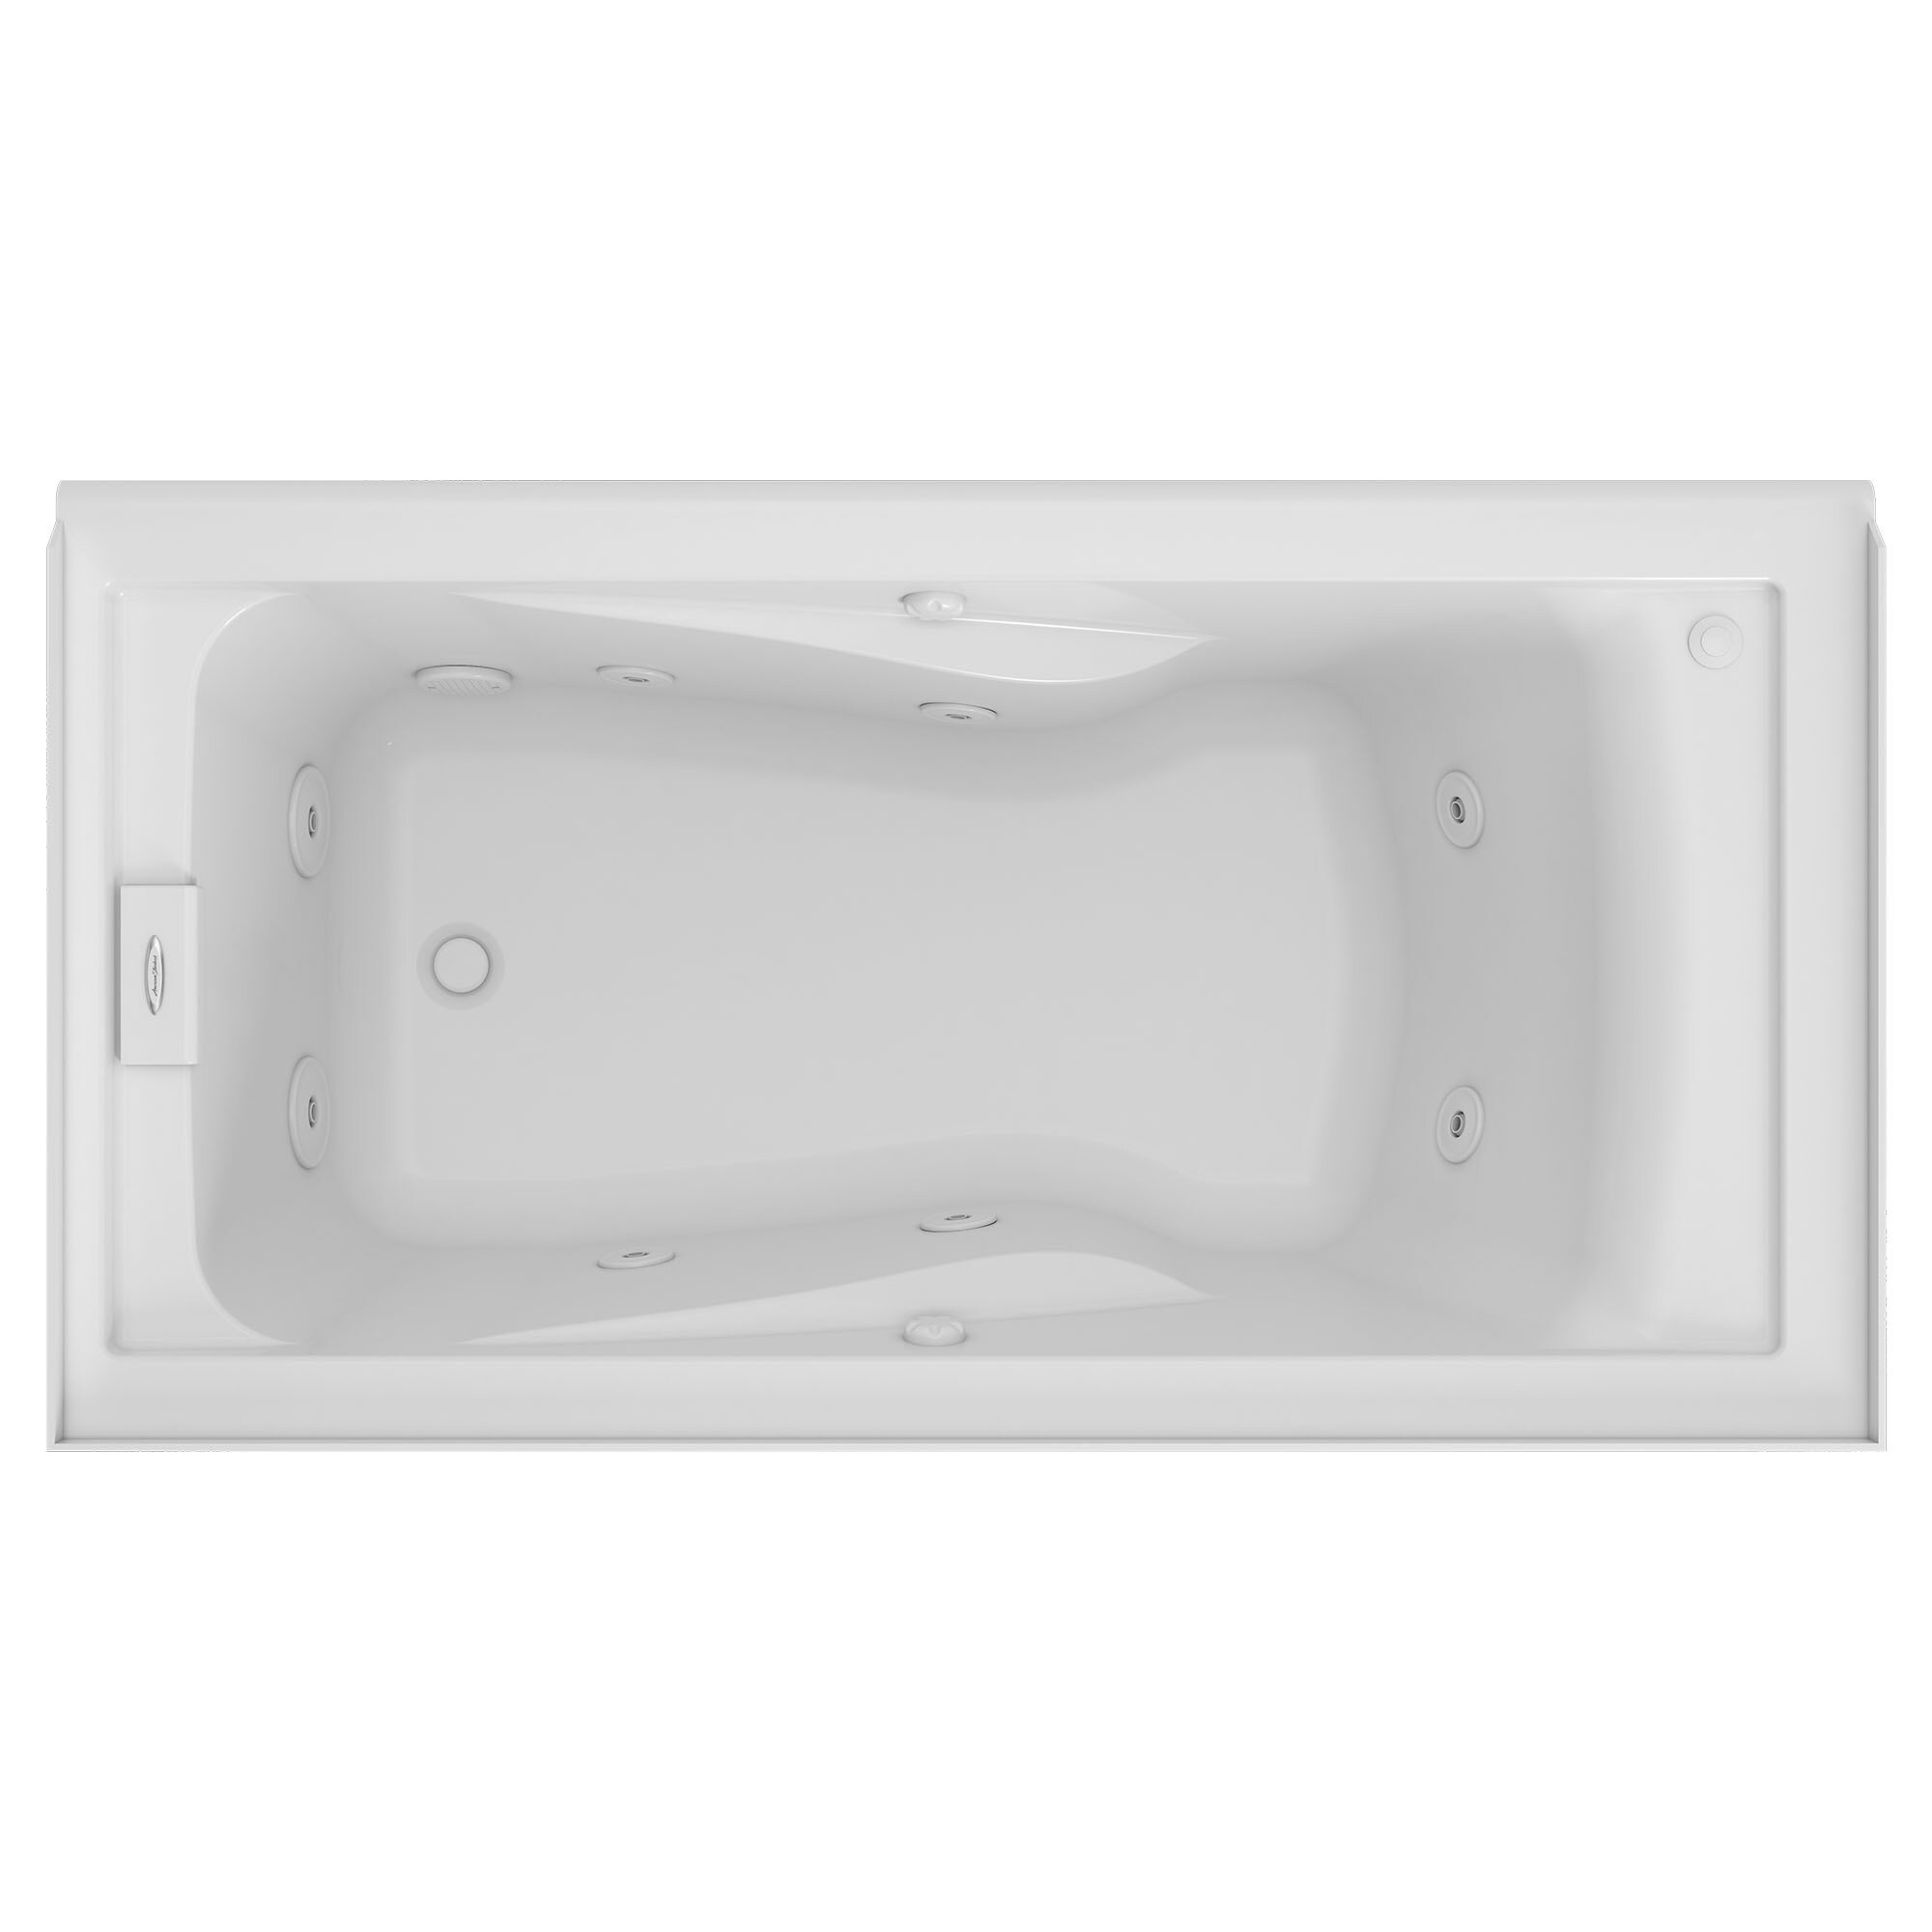 Mainstream 60-in x 32-in White Acrylic Alcove Whirlpool Tub (Left Drain) | - American Standard 2948LC-LHO.020